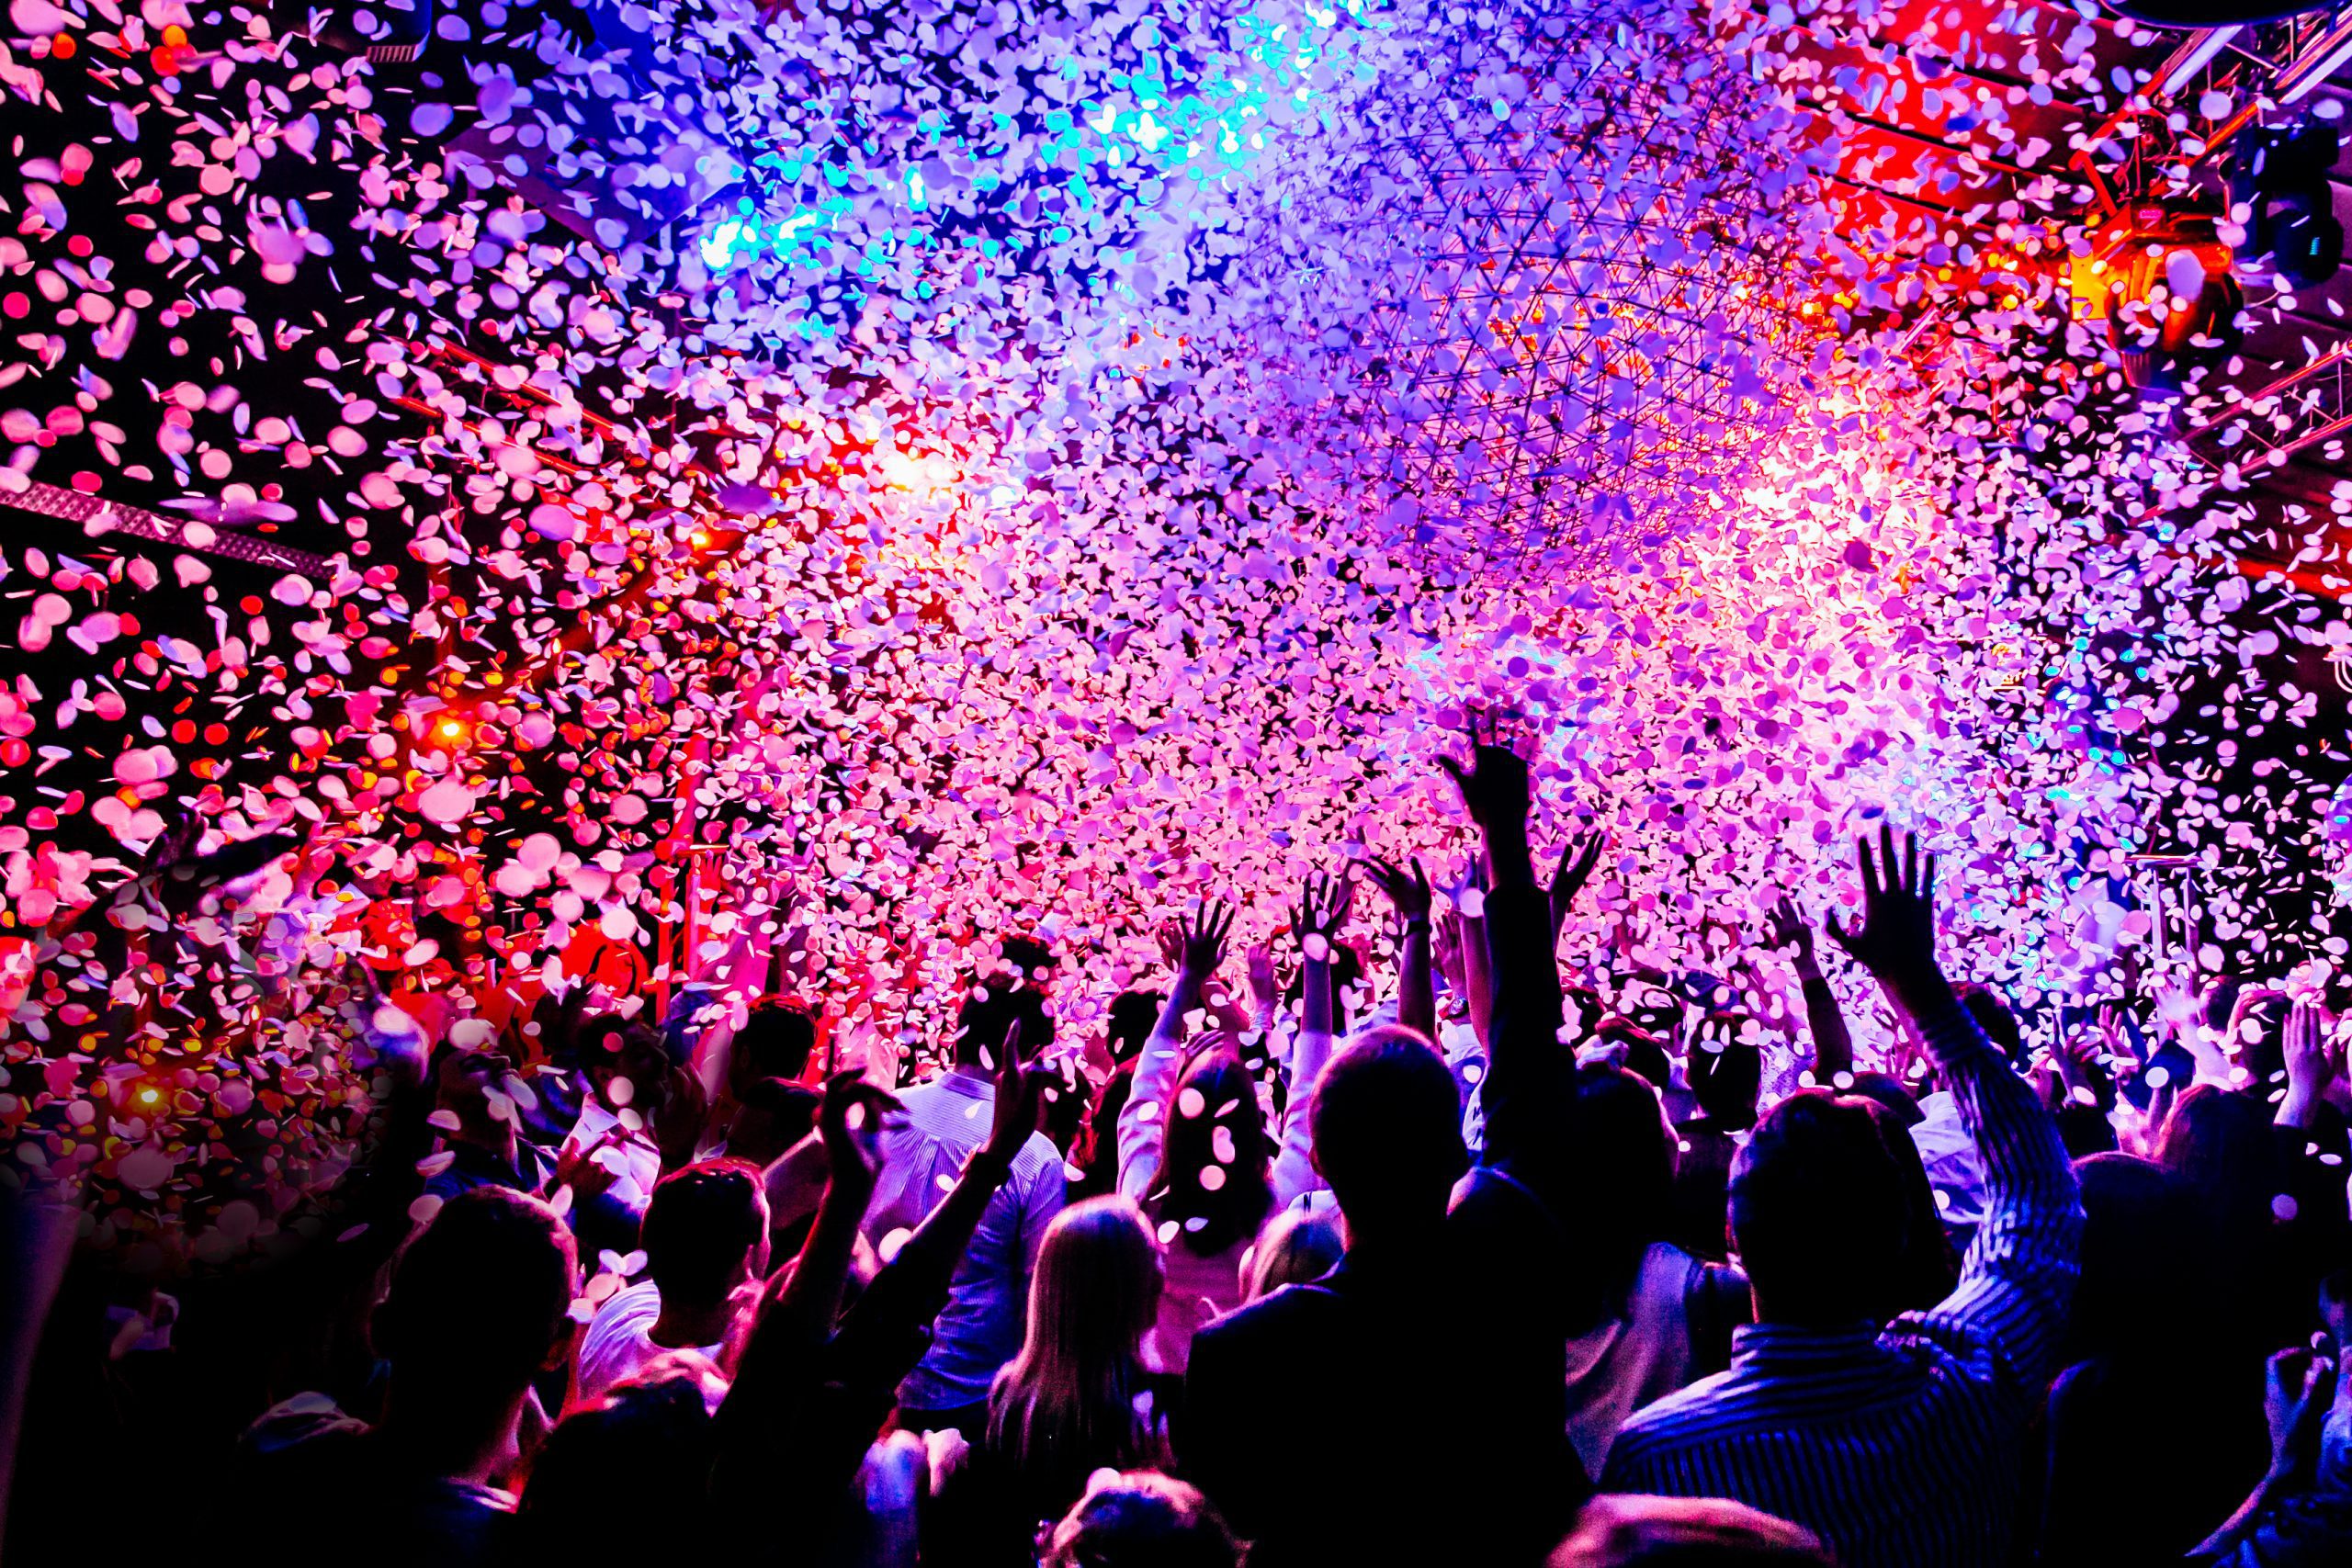 People in a crowd with pink and purple confetti falling down